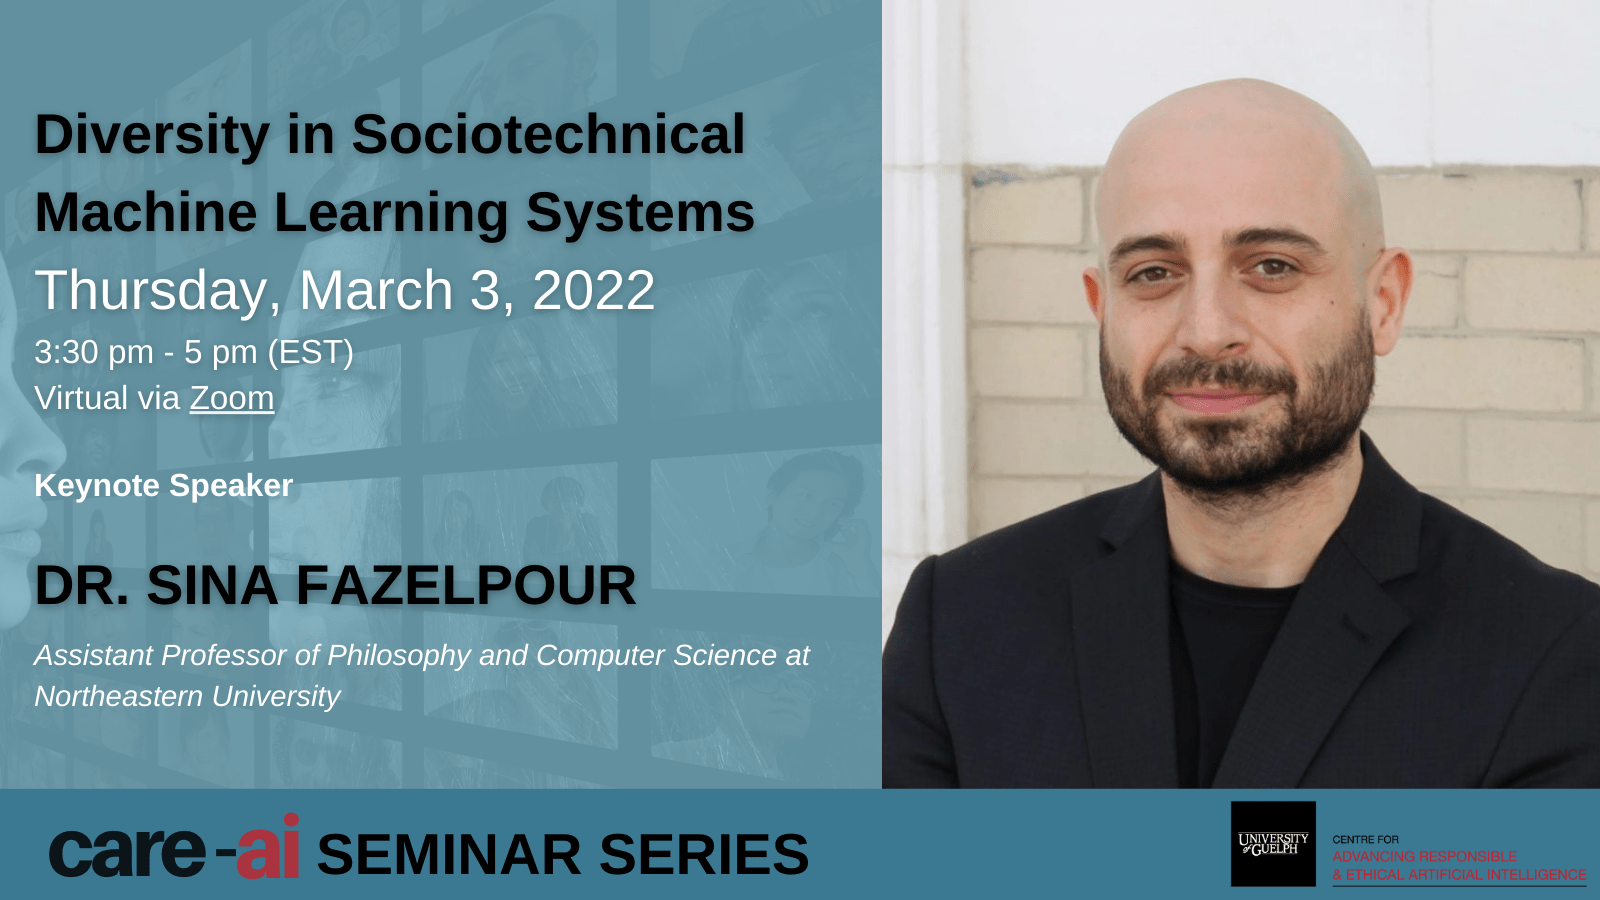 Poster for CARE-AI Seminar Series: Diversity in Sociotechnical Machine Learning Systems Thursday, March 3, 2022 3:30 - 5 PM Key Note Speaker Dr. Sina Fazelpour Assistant Professor of Philosophy and Computer Science at Northeastern University